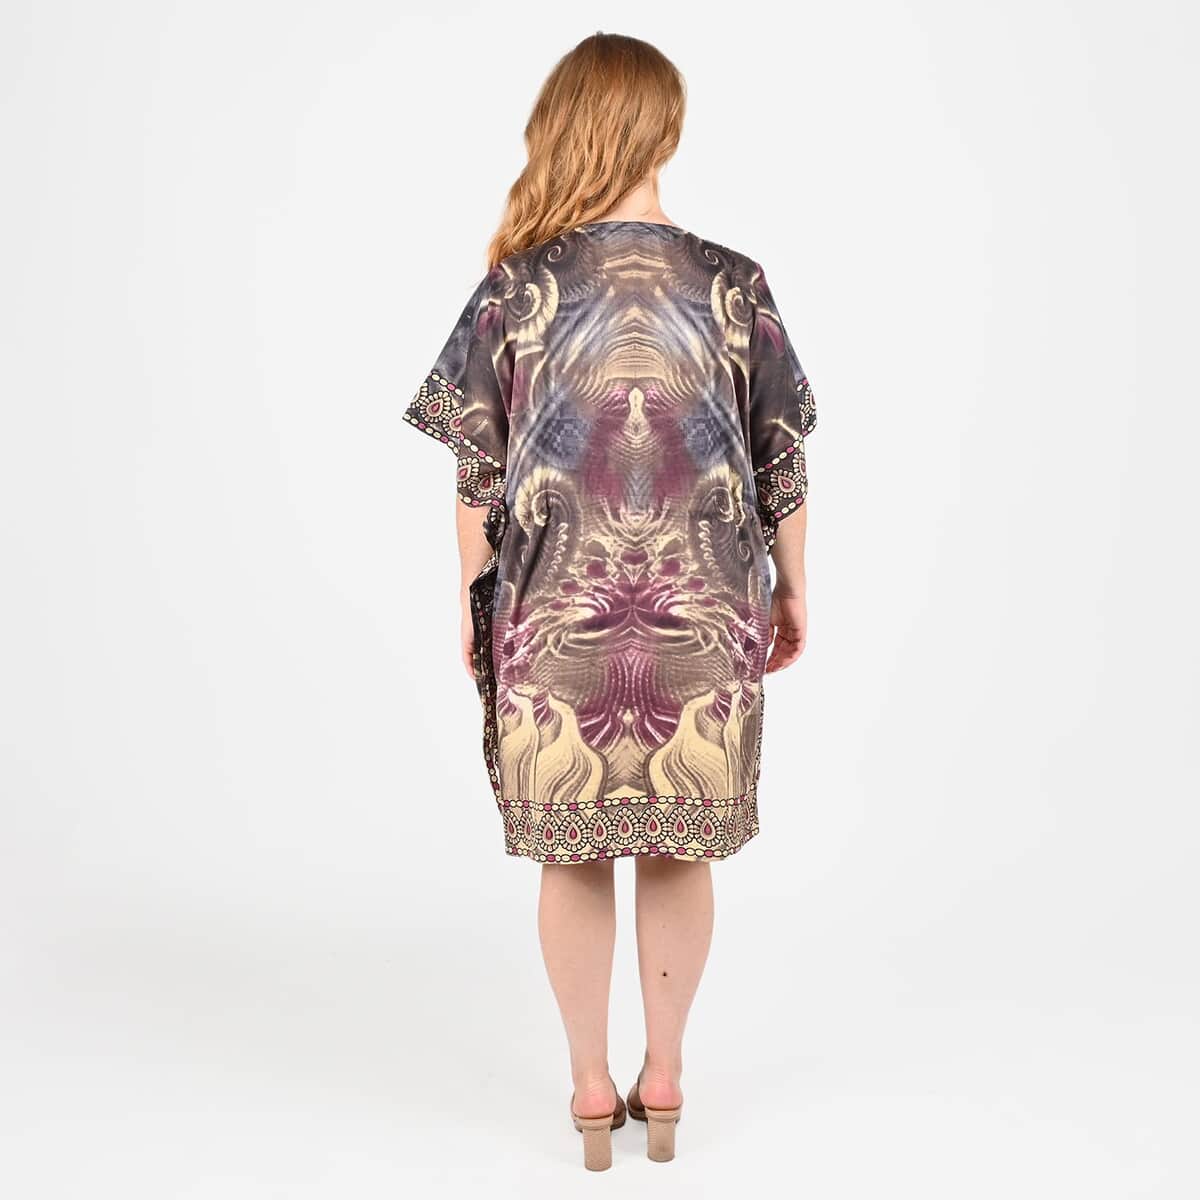 TAMSY Green Fantasy Print 100% Polyester V-neck Kaftan with Pockets - One Size Fits Most (36"x41") image number 1